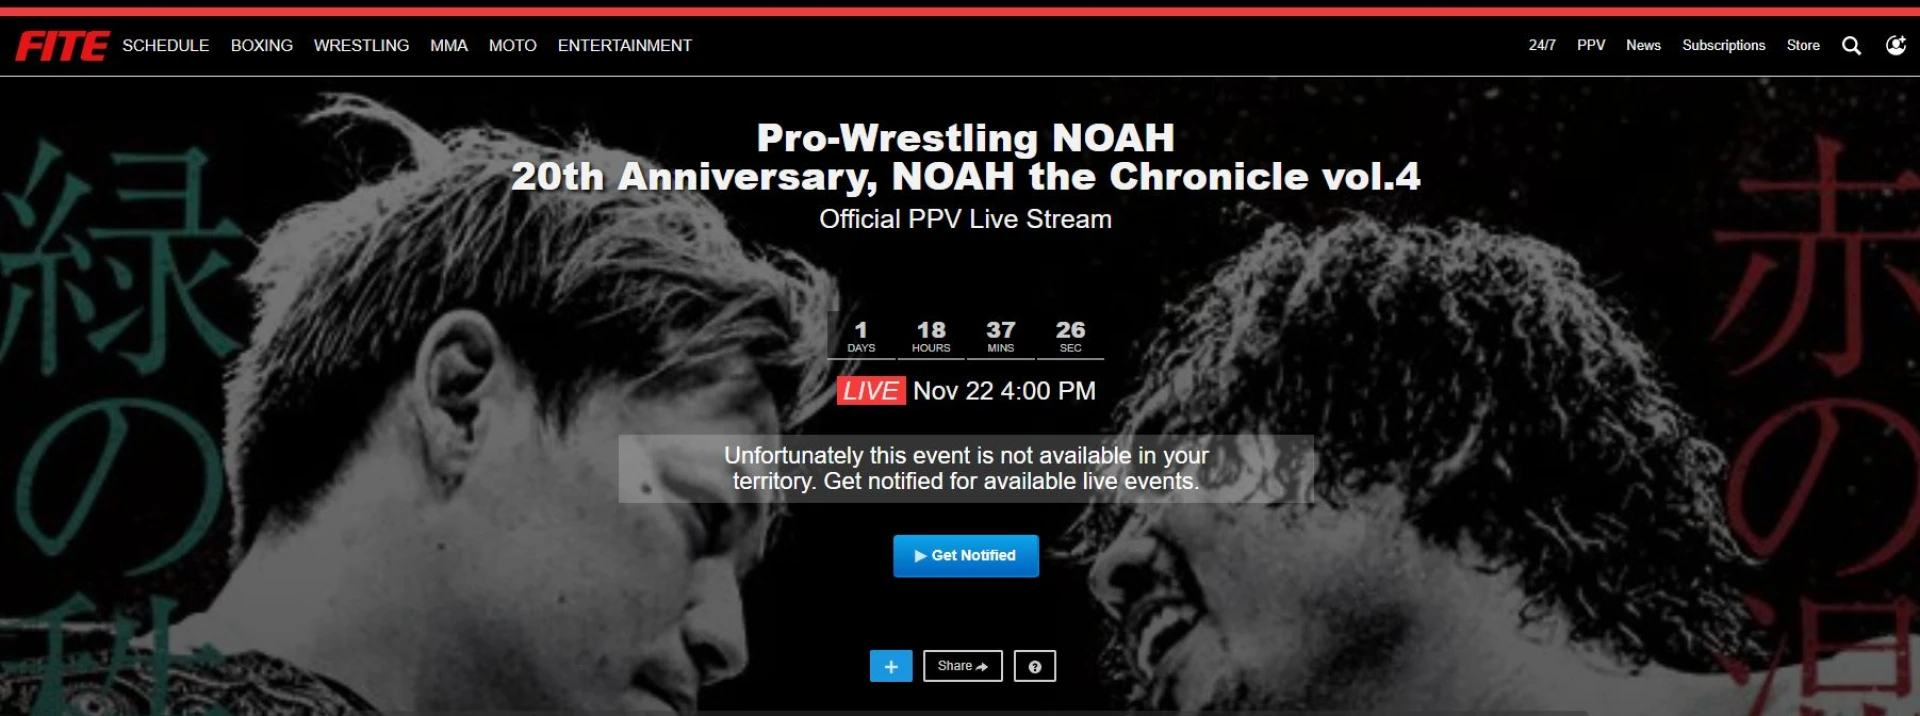 Pro-Wrestling NOAH 20th Anniversary, NOAH the Chronicle vol.4 Official PPV Live Stream